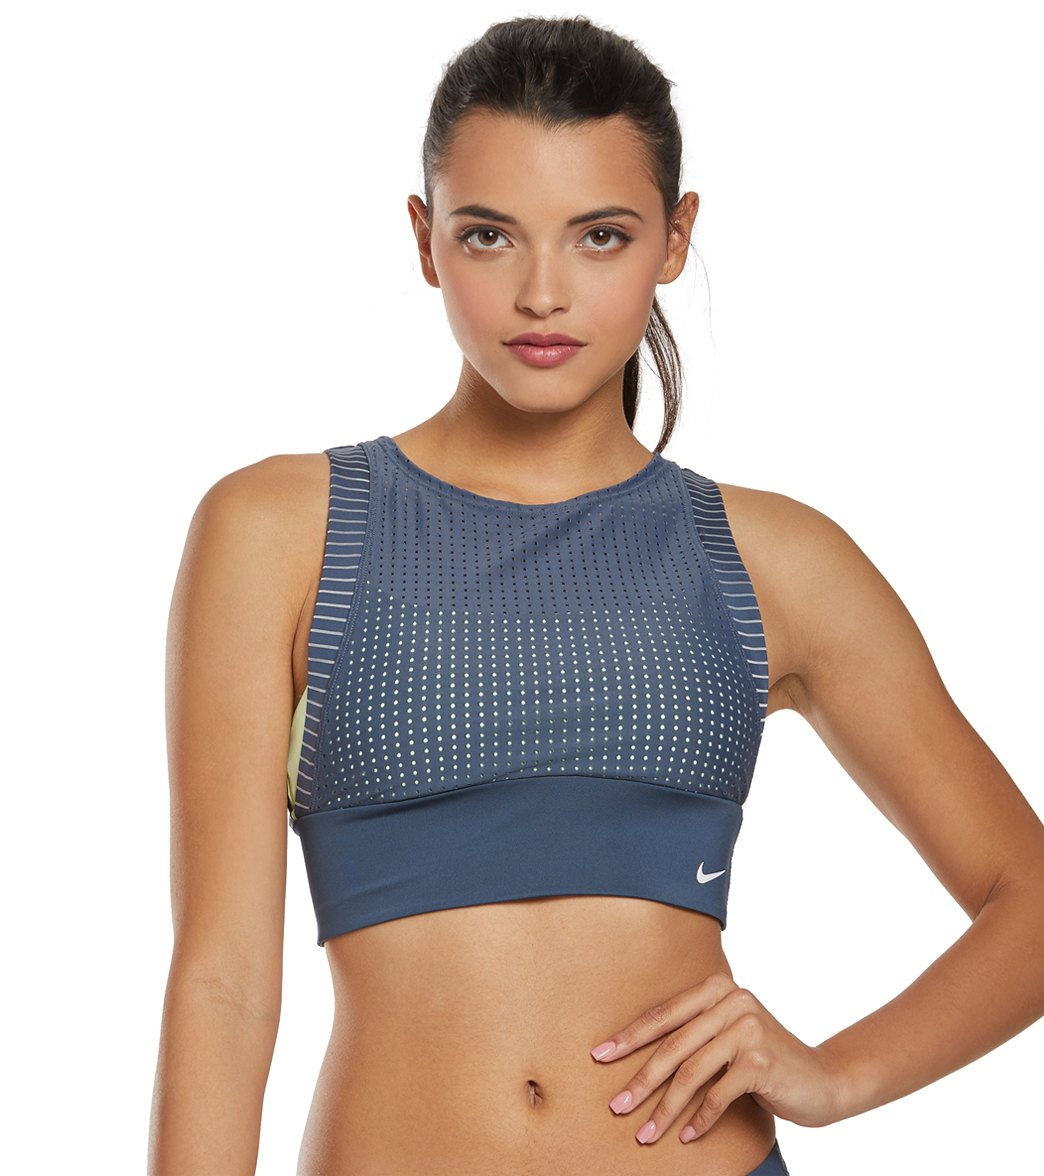 Nike Sport Mesh Convertible Layered High Neck Midkini Top at SwimOutlet.com